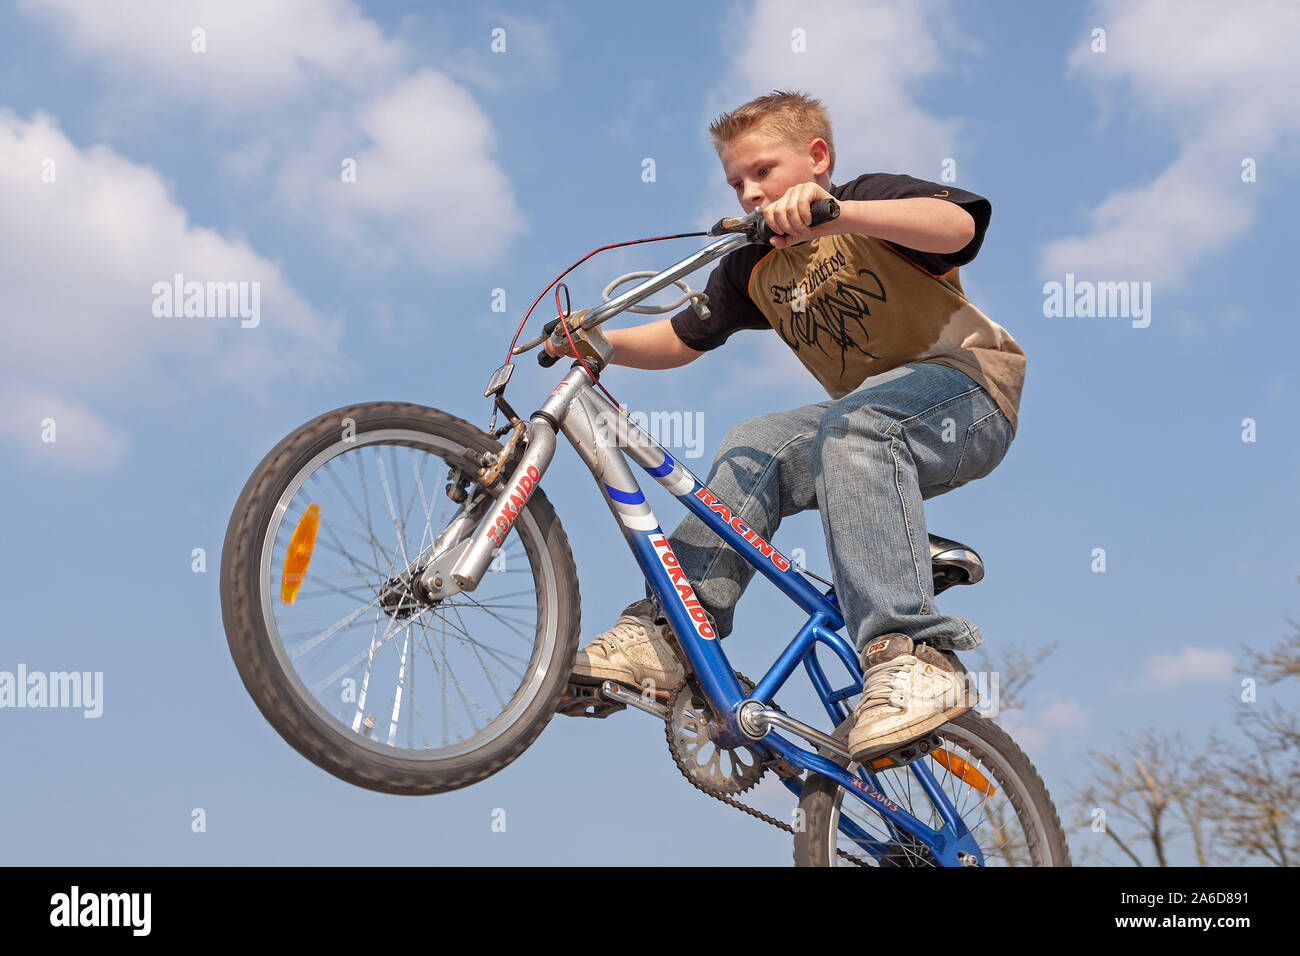 A jung boy is jumping with his bike Stoc image